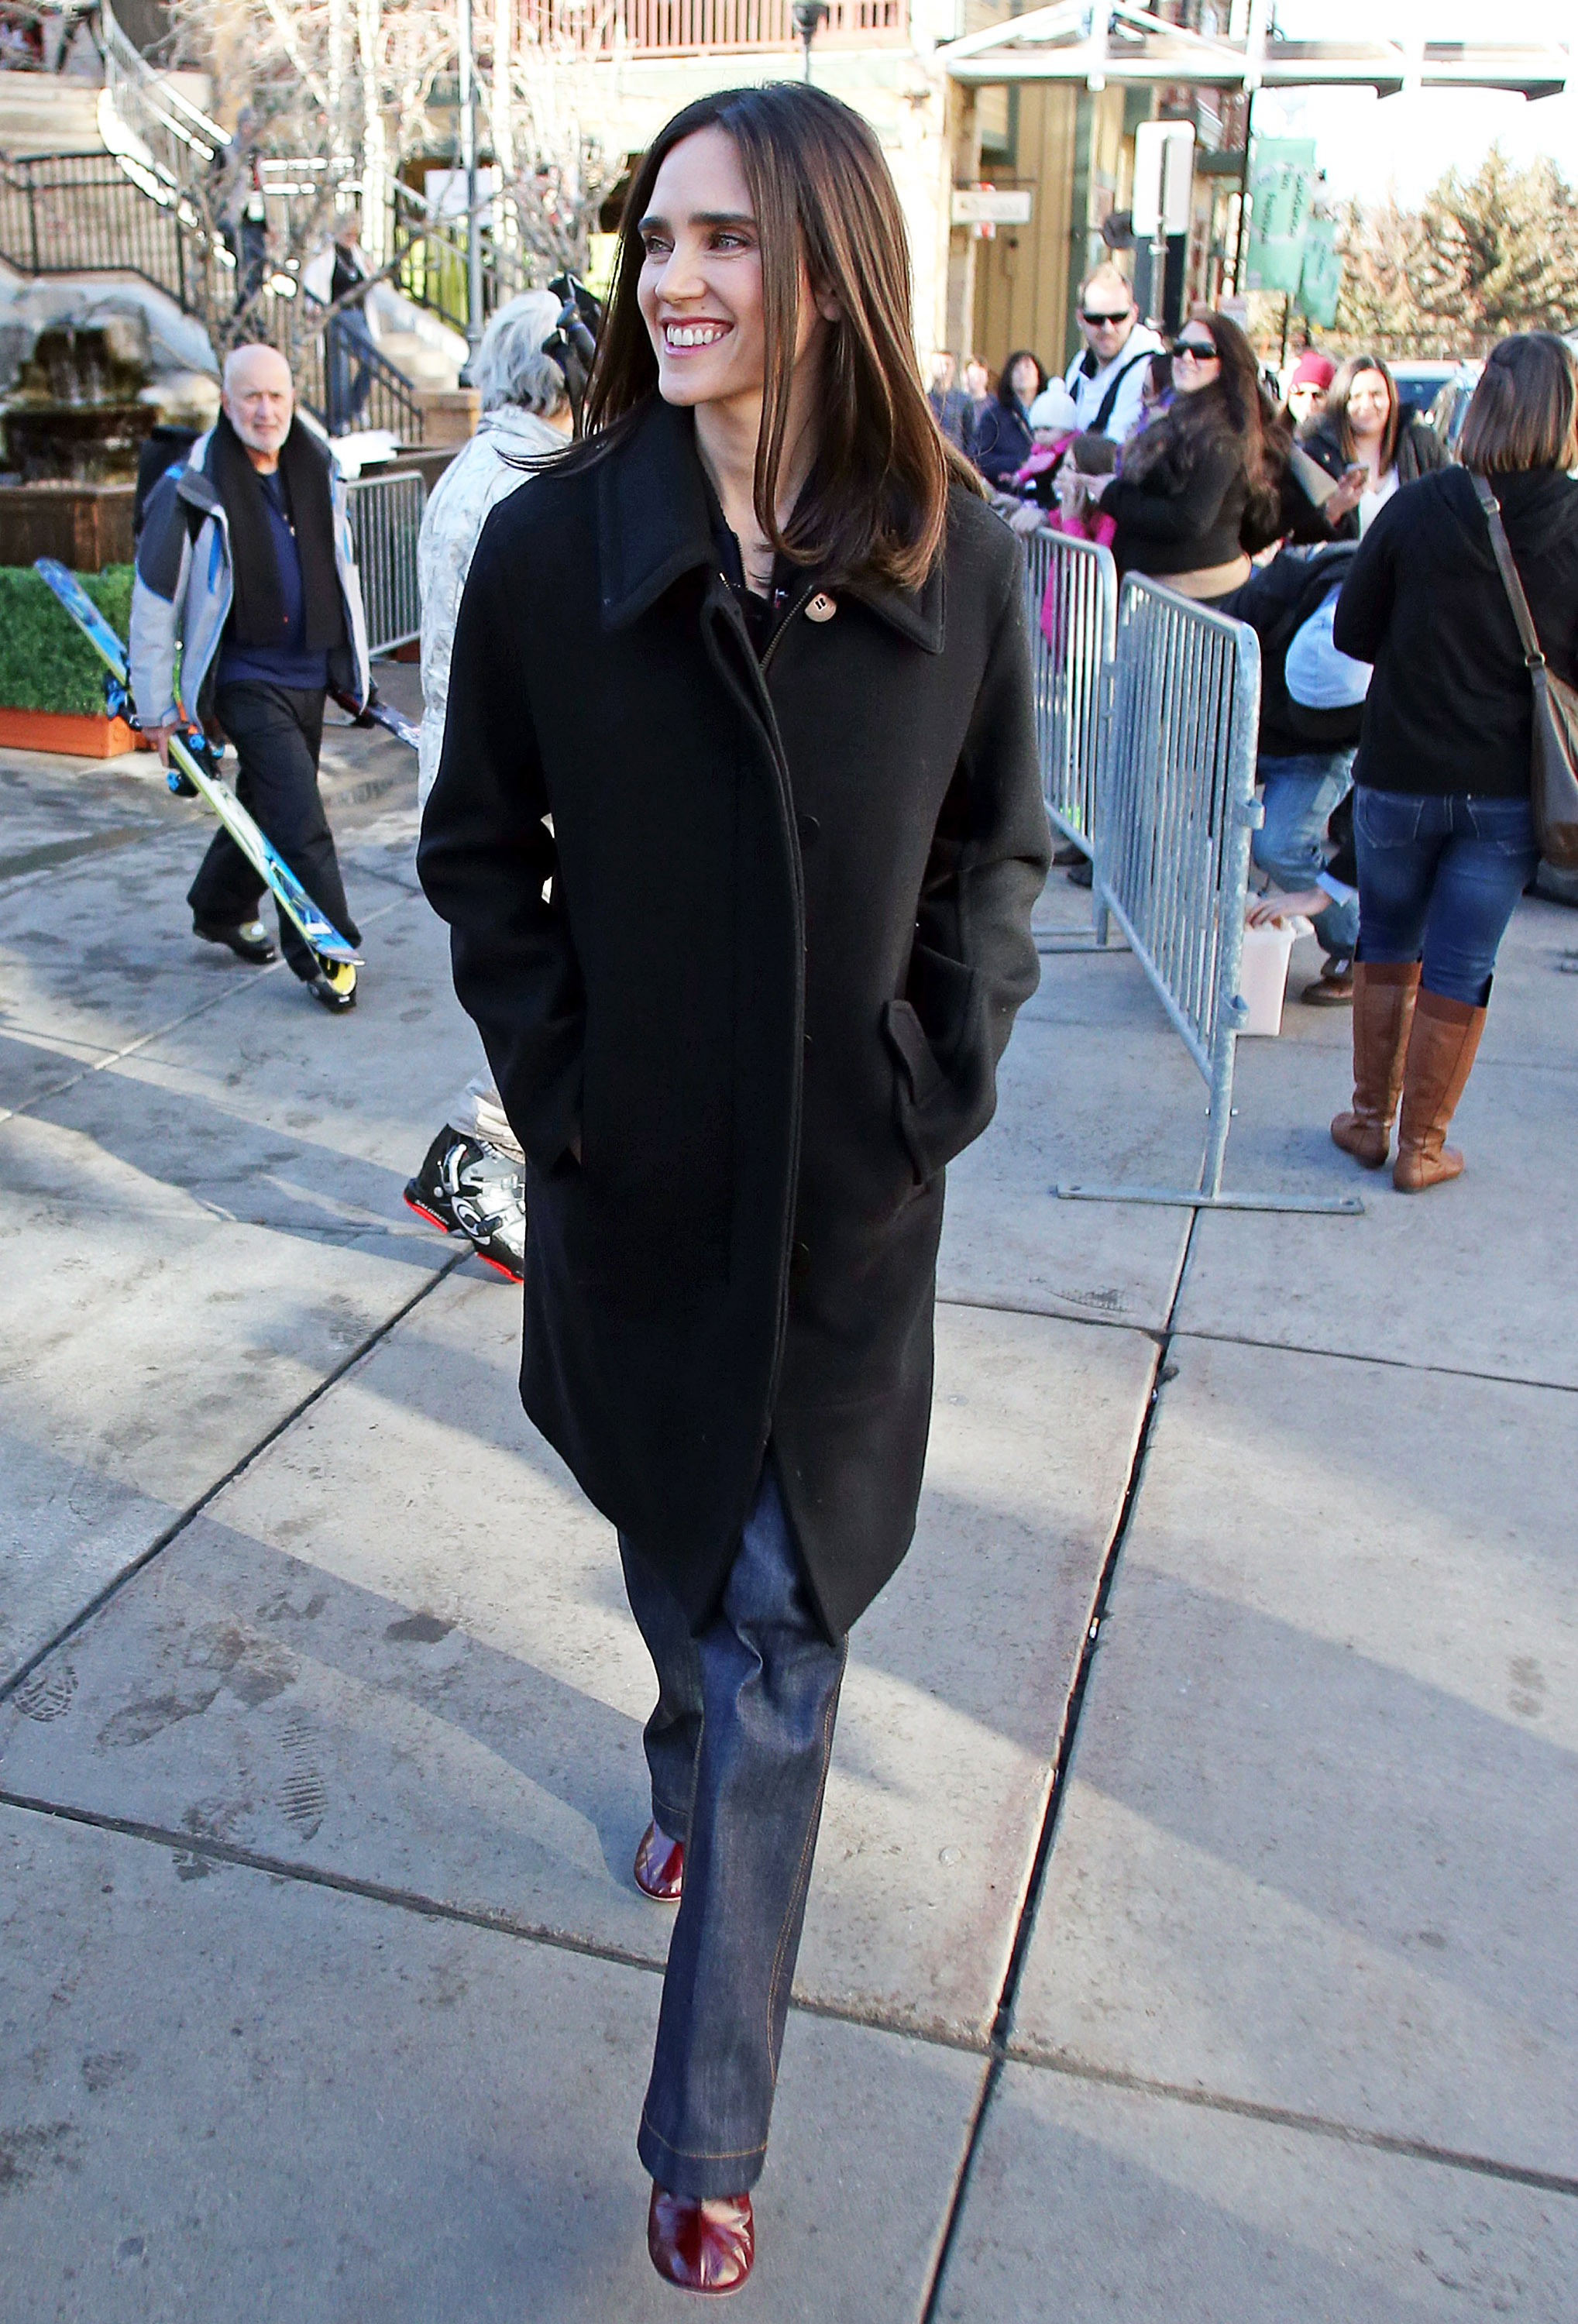 Fugs and Fabs: The (Mostly) Candids of Sundance